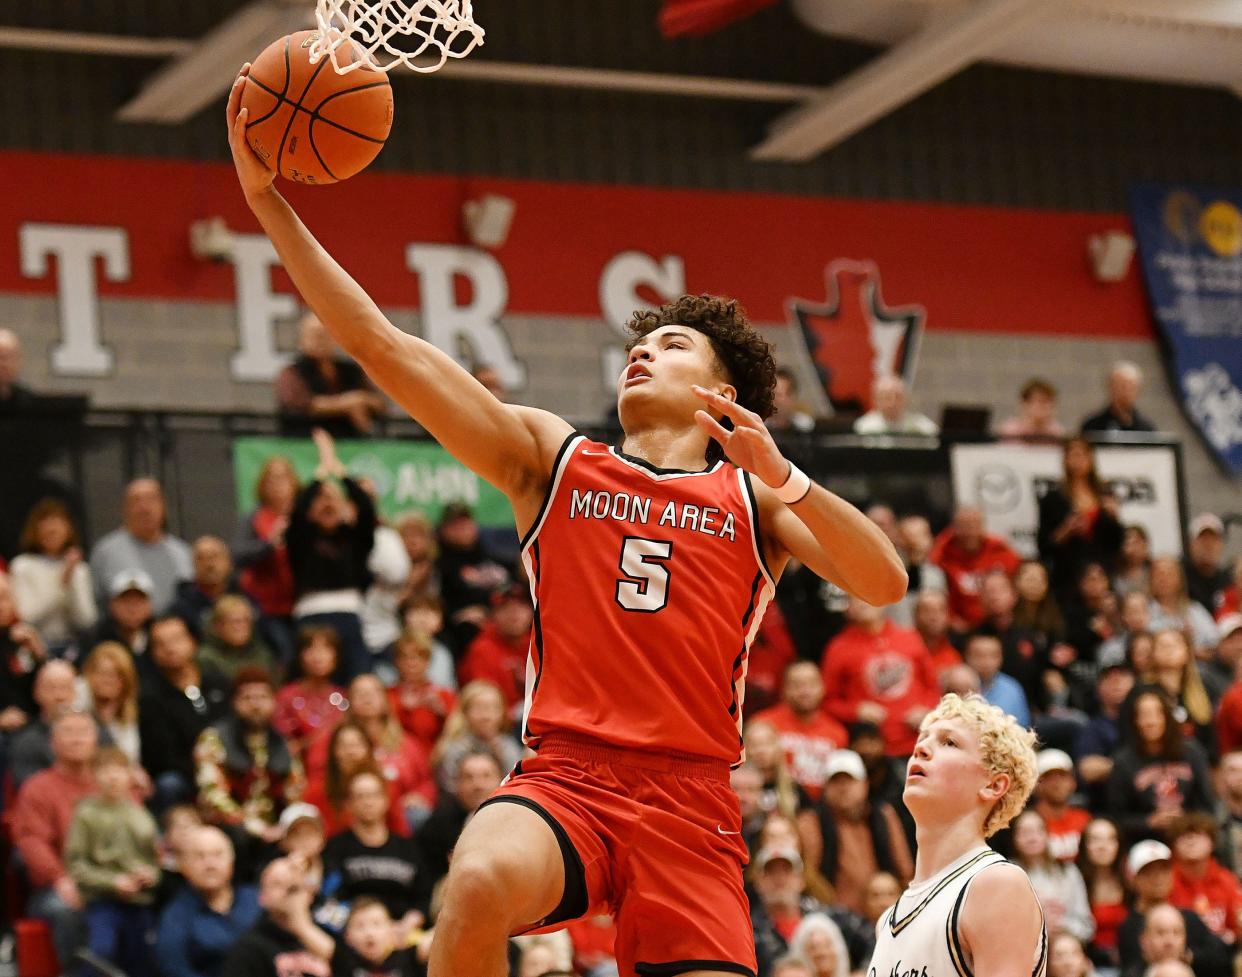 Moon’s Elijah Guillory shoots over Franklin Regional’s Colin Masten during Monday’s PIAA class 5A semifinal game at Peters Township High School.